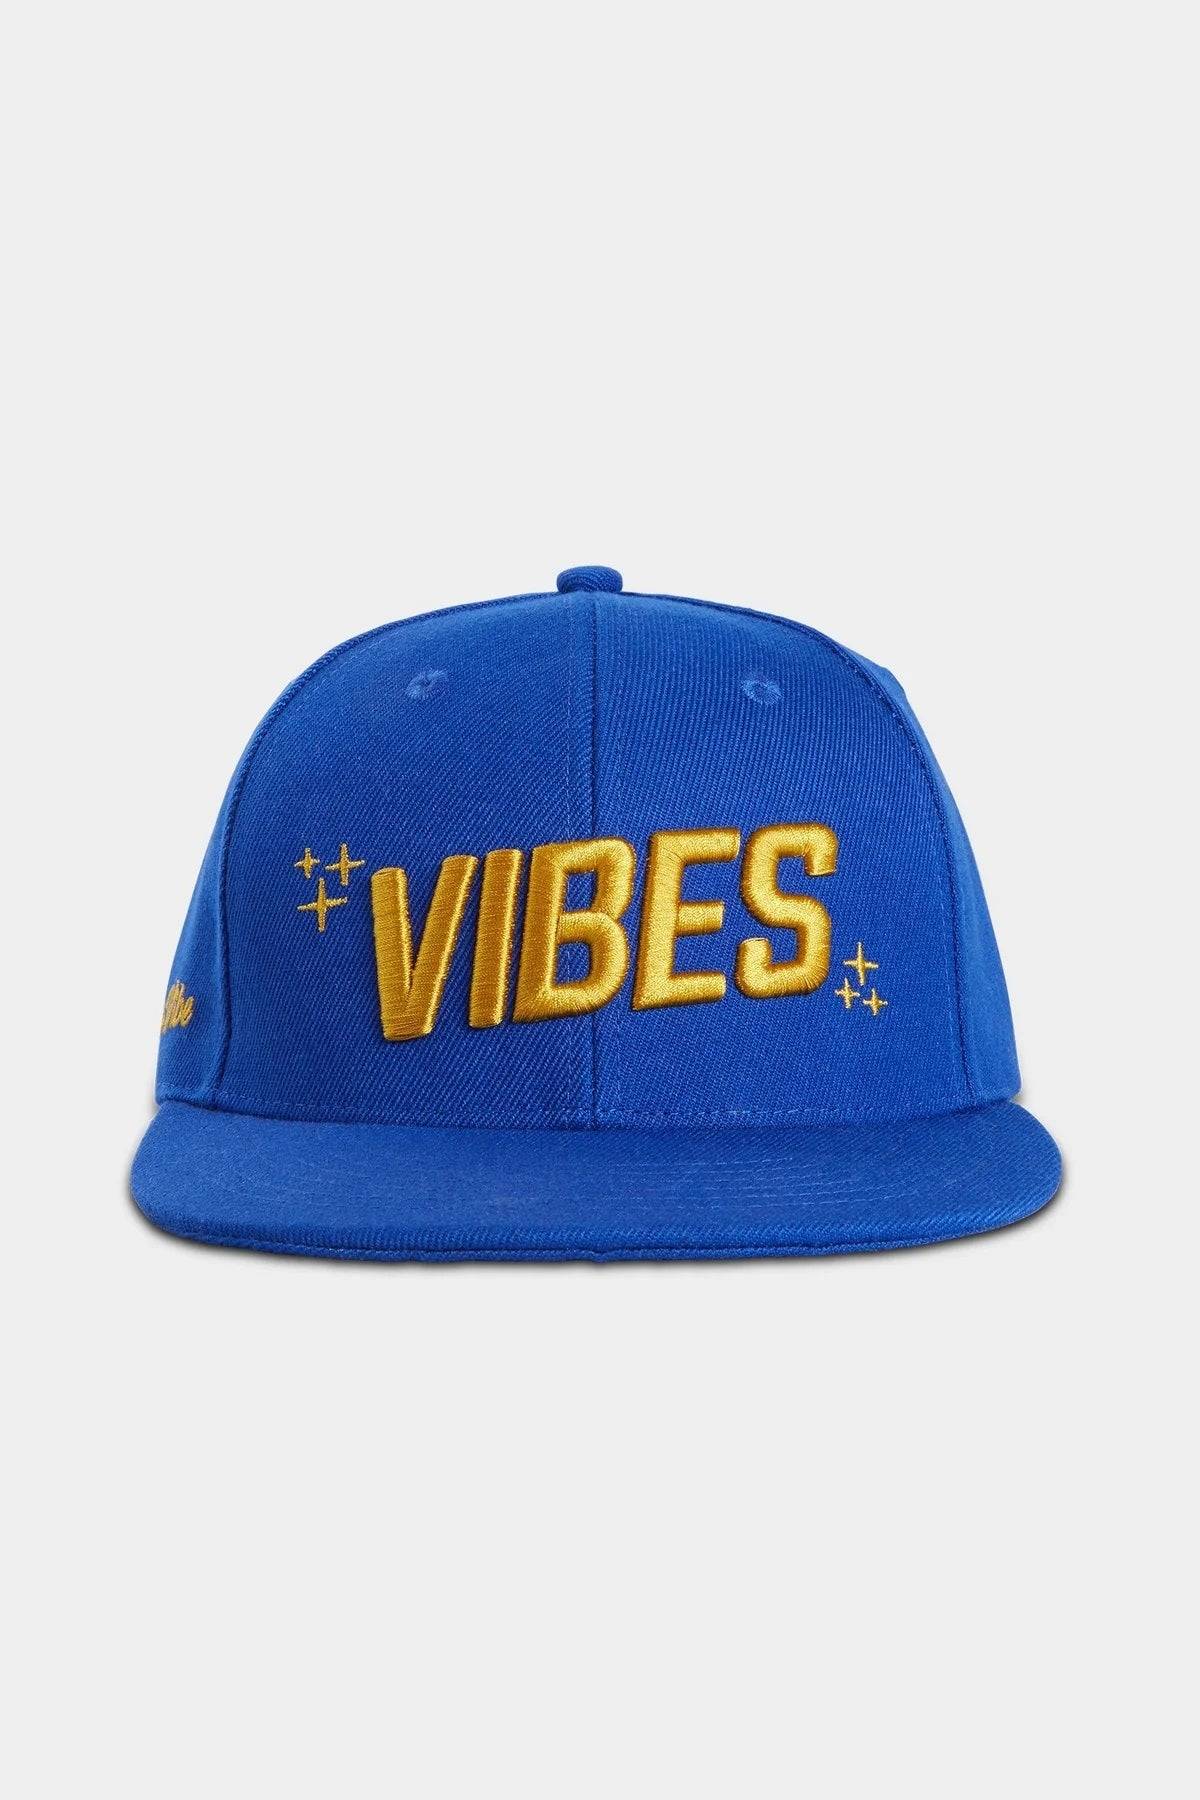 VIBES Blue Snap Back Hat With Gold Logo